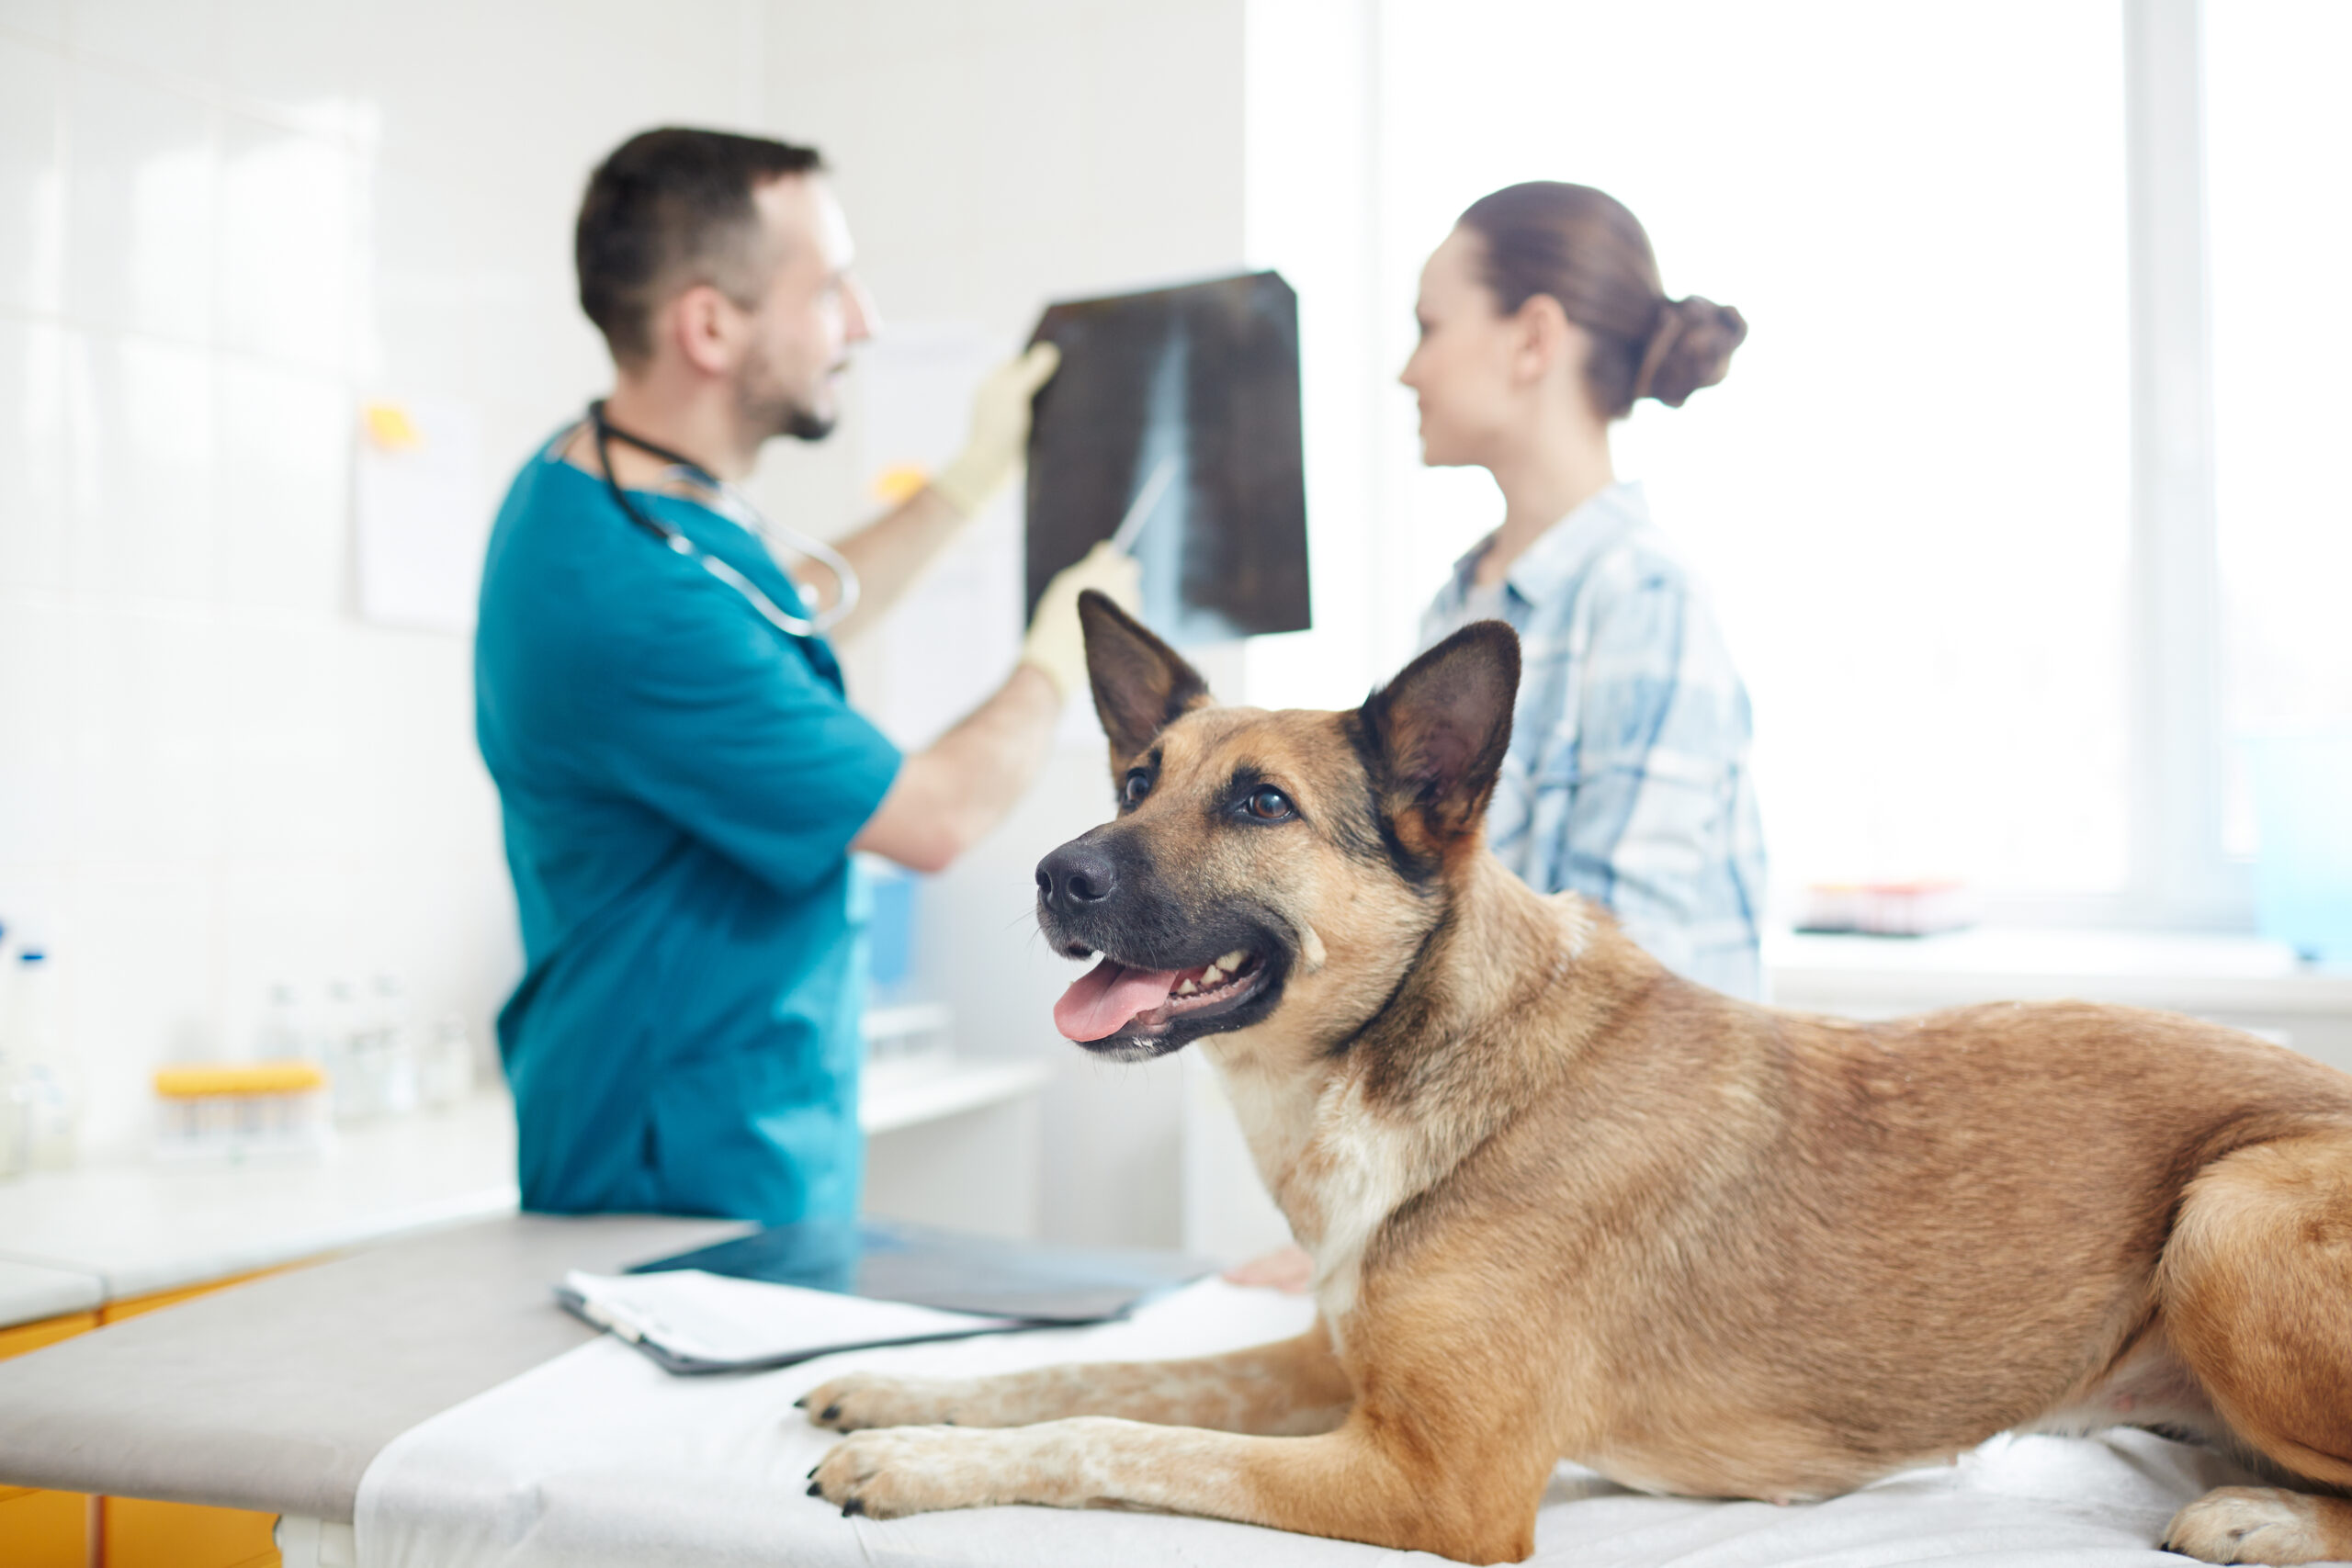 How Do I Increase Client Compliance for Veterinary X-Ray?